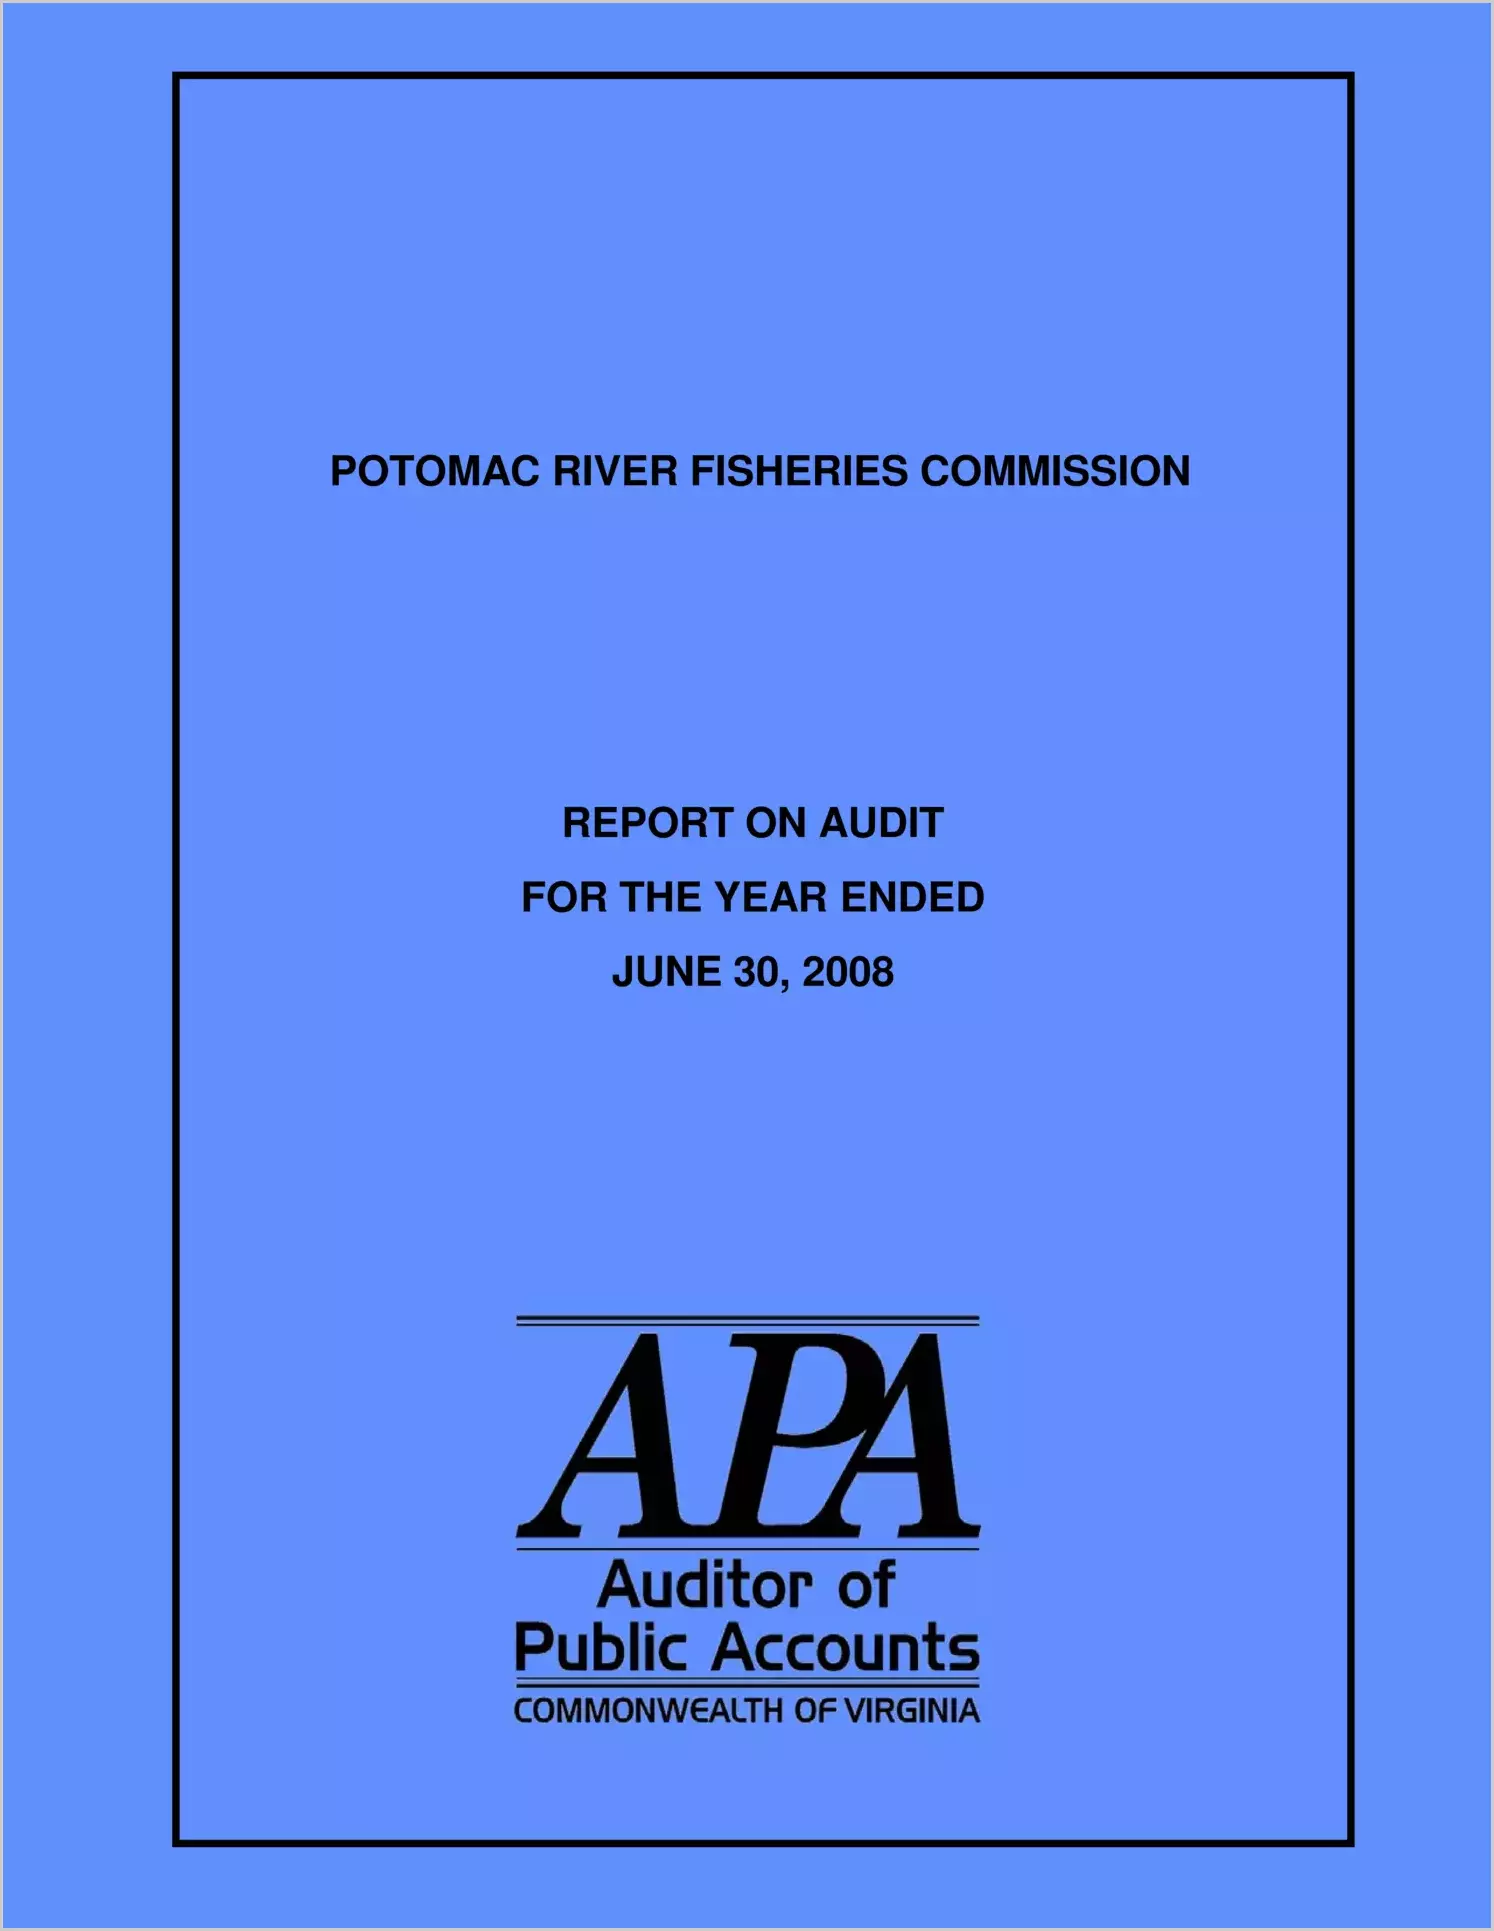 Potomac River Fisheries Commission report on audit for the year ended June 30, 2008